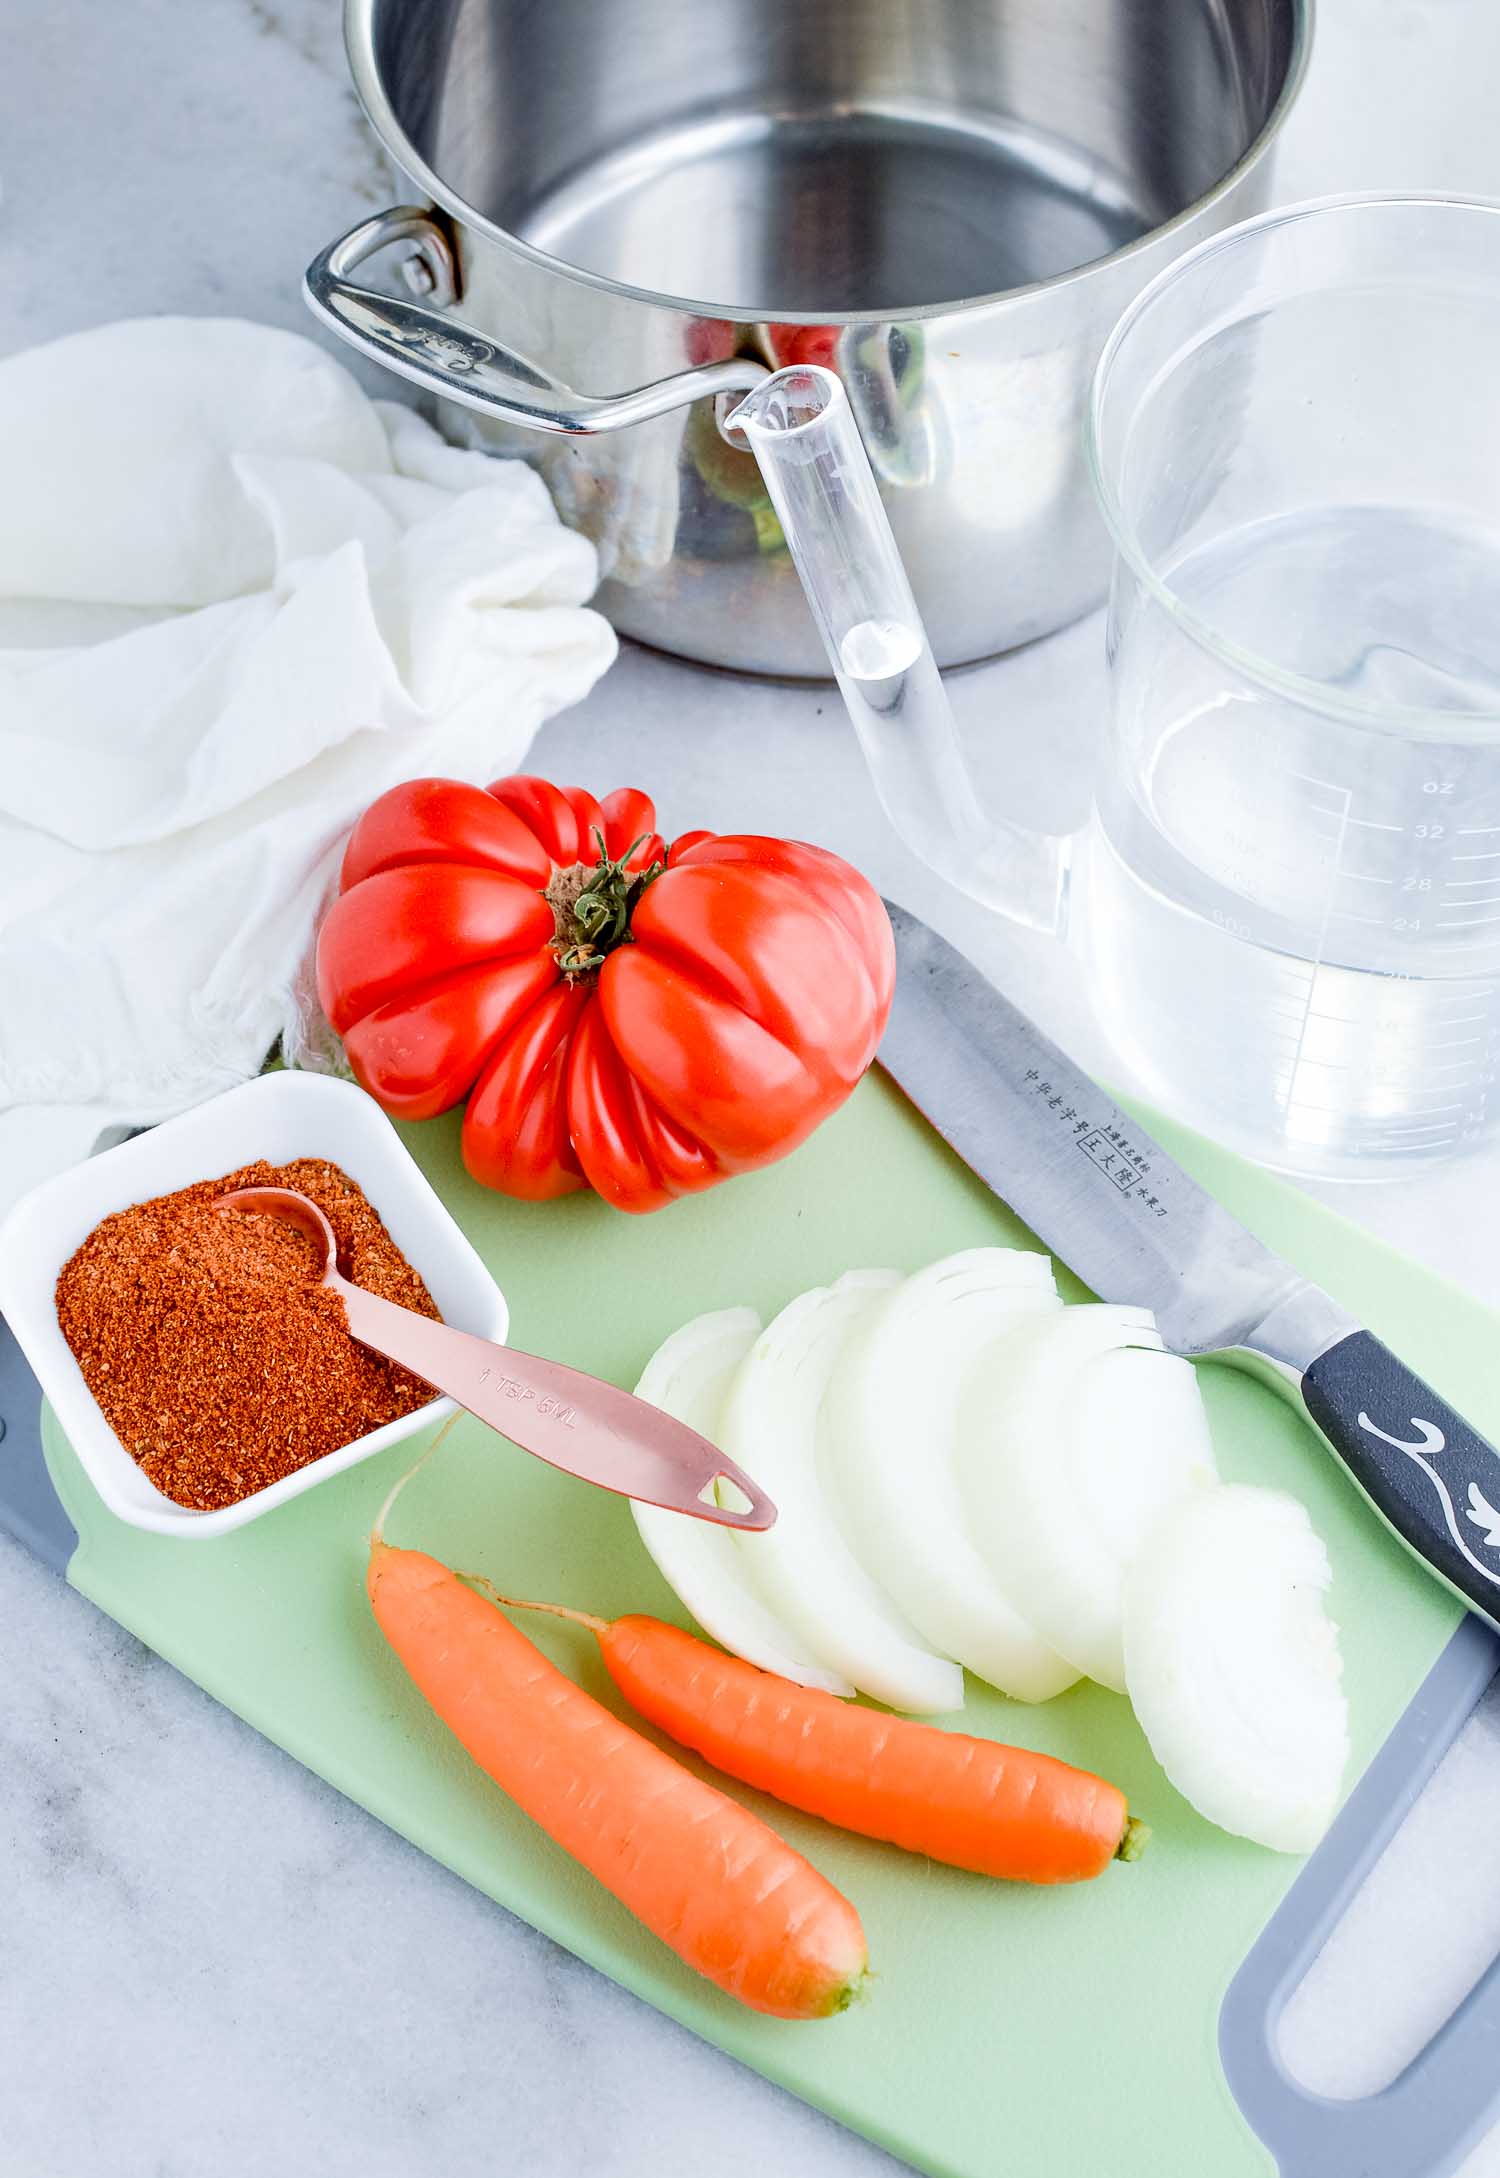 A silver saucepan, tomato, seasonings, water, onion, carrot and a plastic container of water with a green cutting board and knife and a white towel.